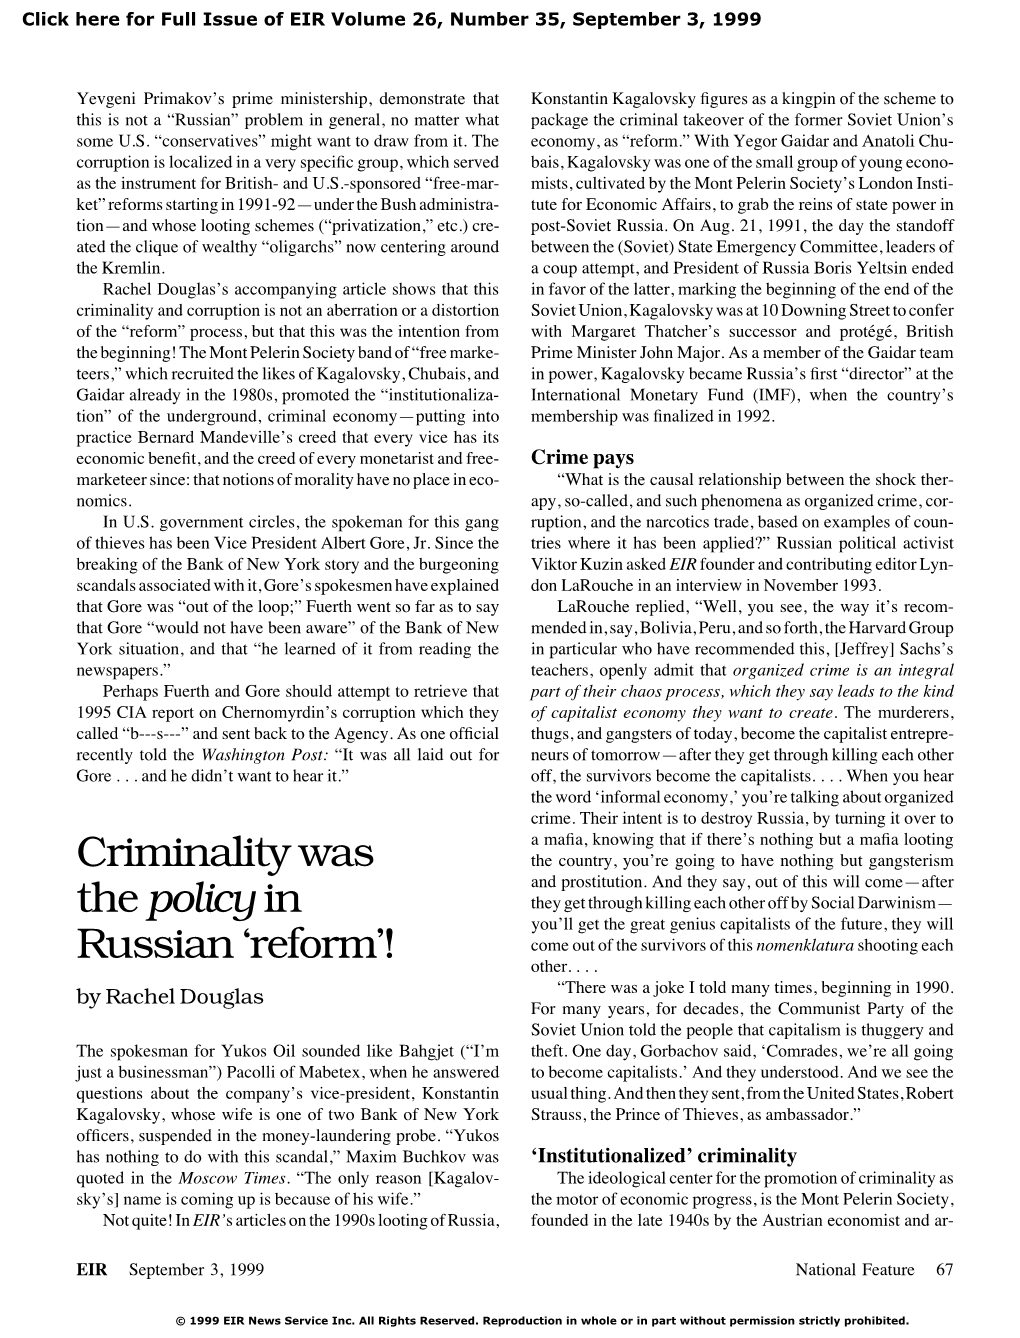 Criminality Was the Policy in Russian